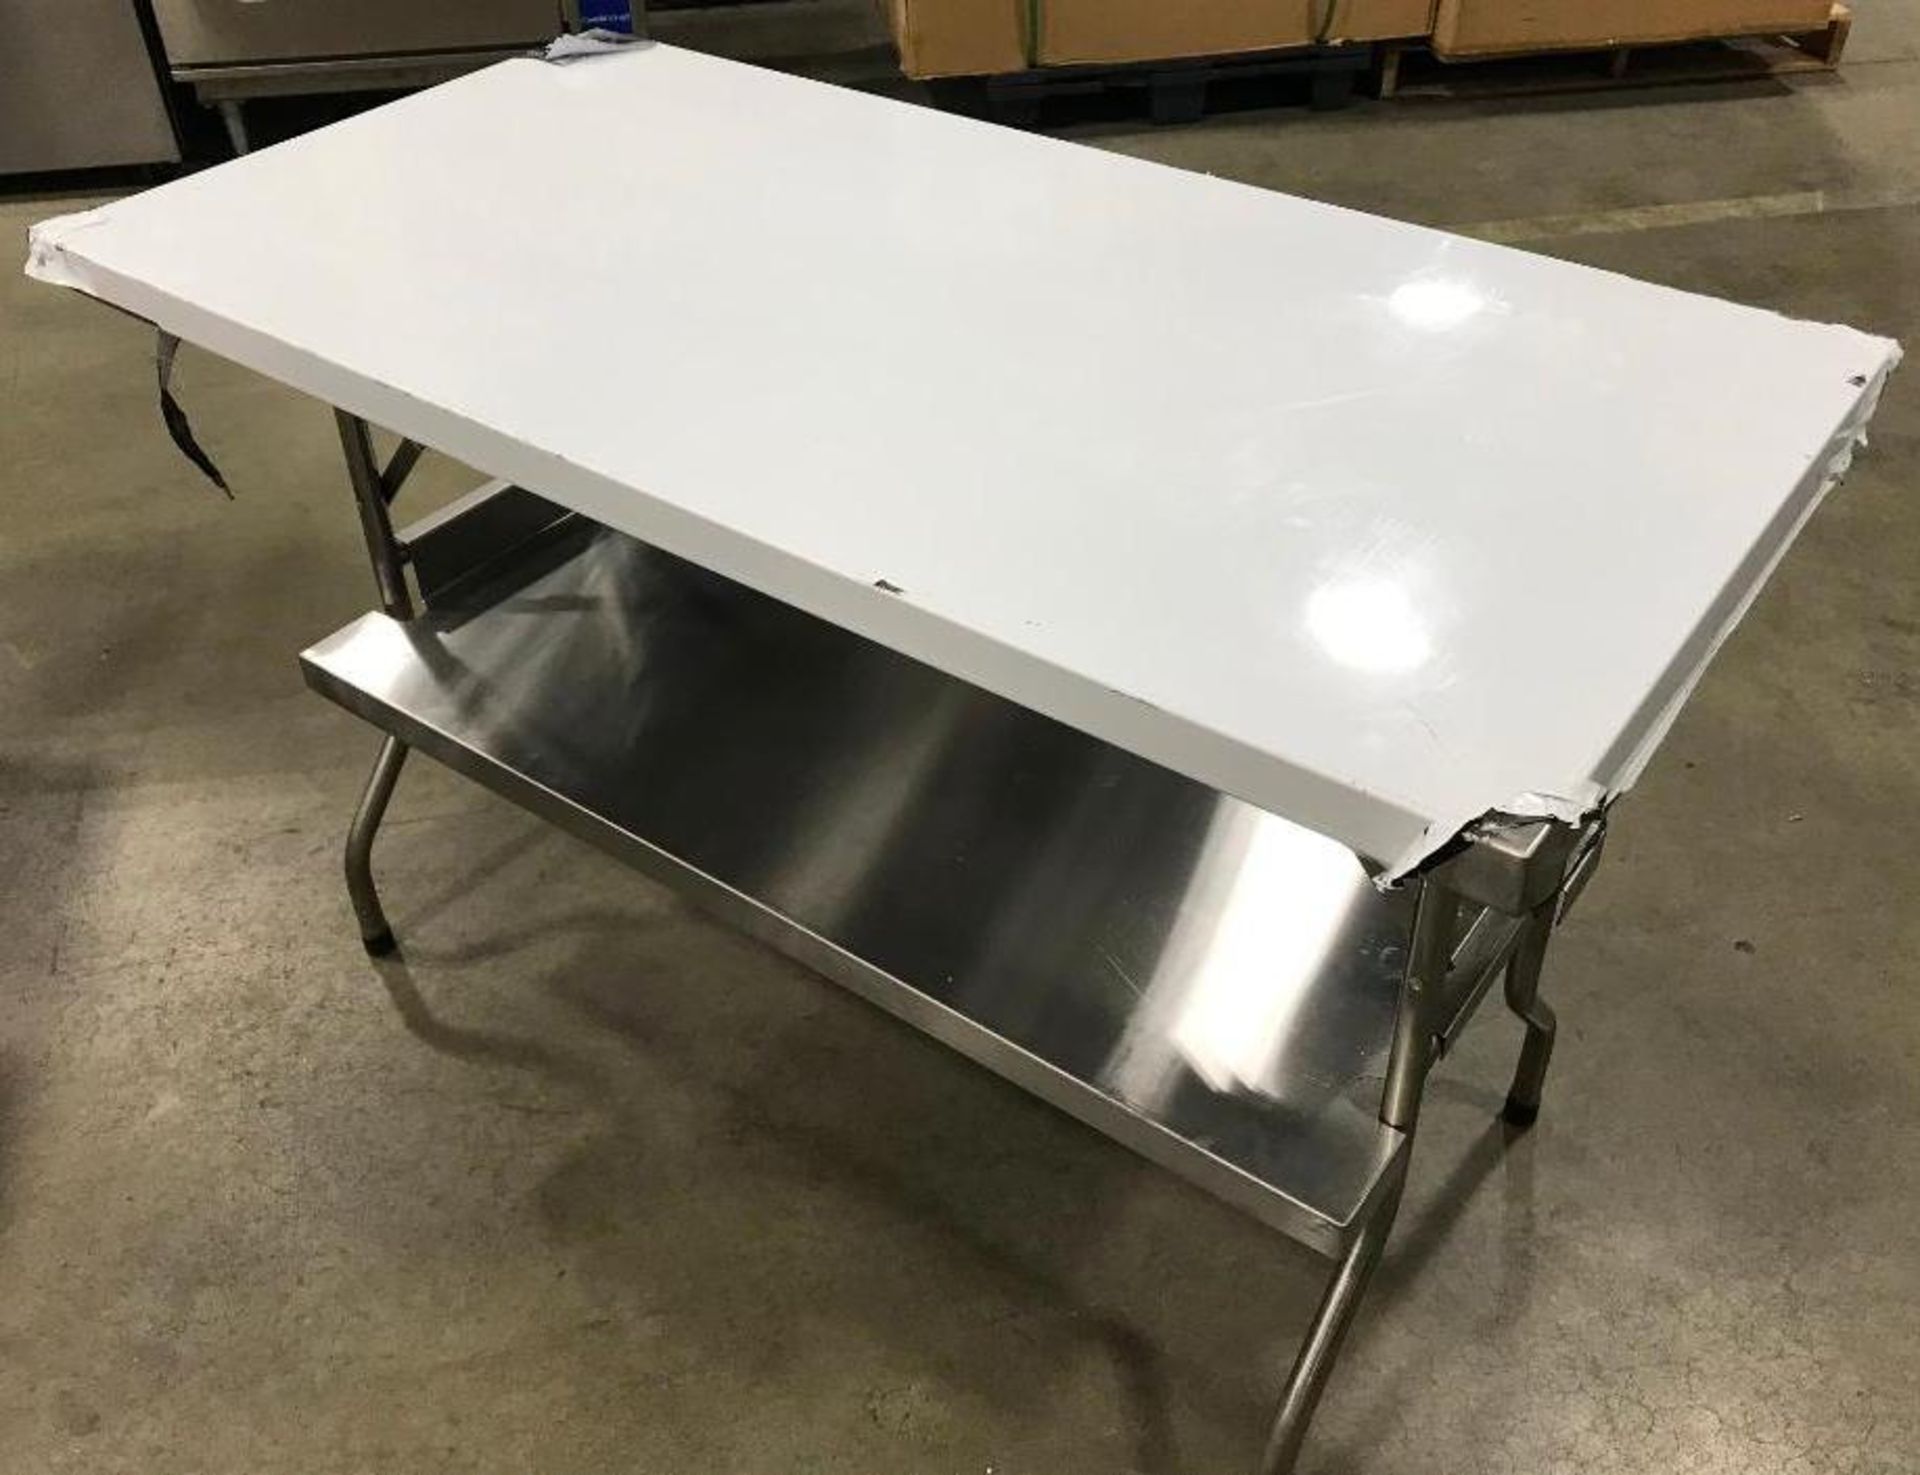 48" X 24" STAINLESS STEEL FOLDING TABLE - Image 7 of 8